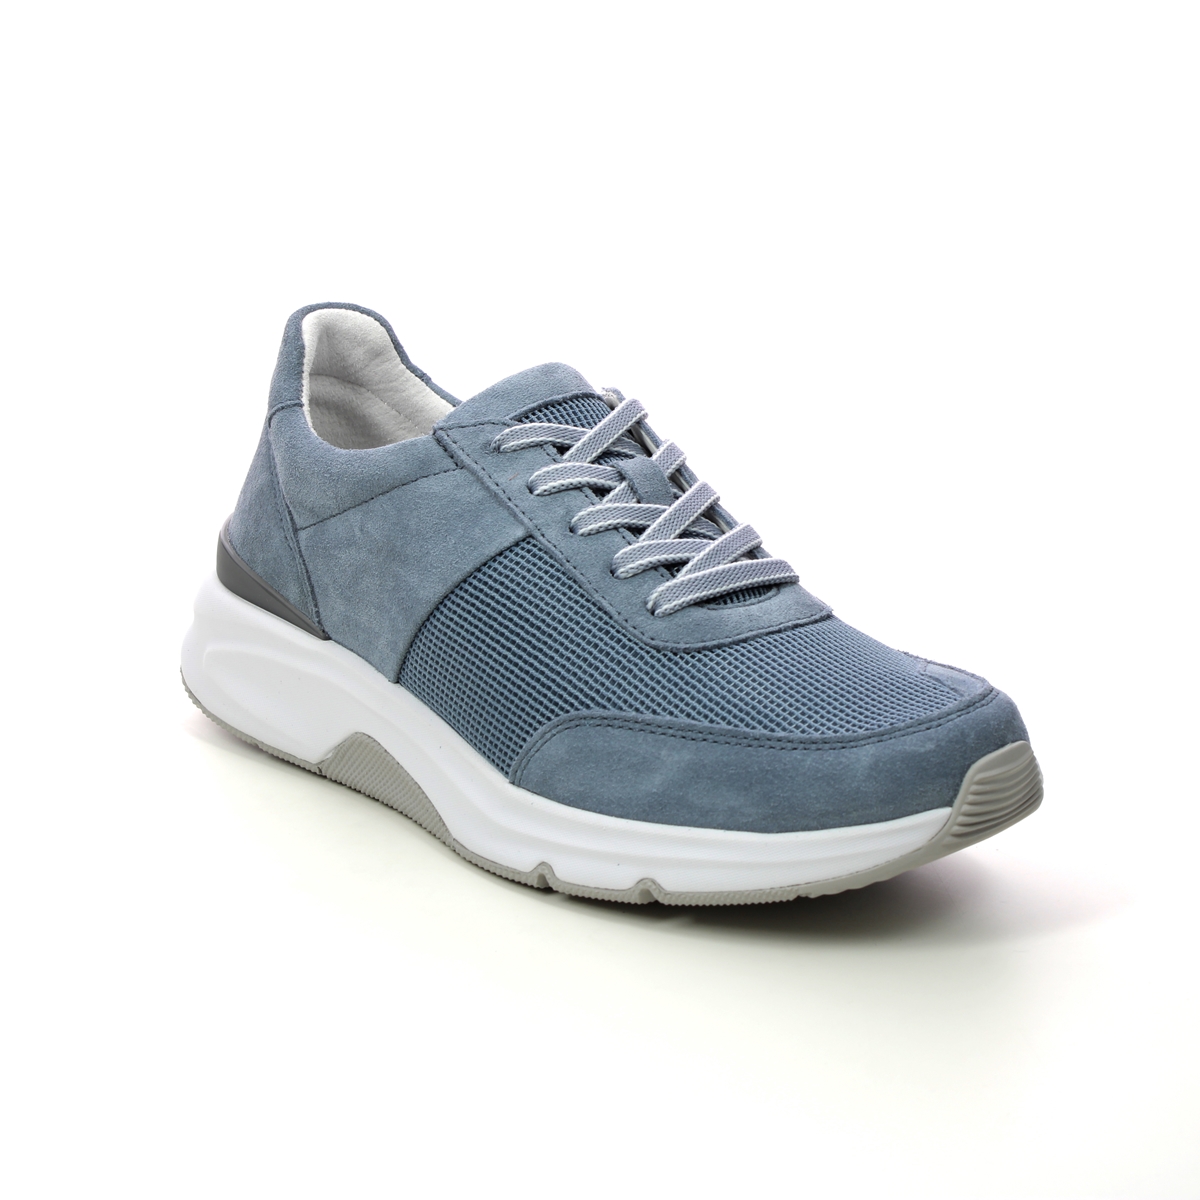 Gabor Aloe Rolling Soft Denim Suede Womens trainers 26.897.26 in a Plain Leather and Textile in Size 4.5